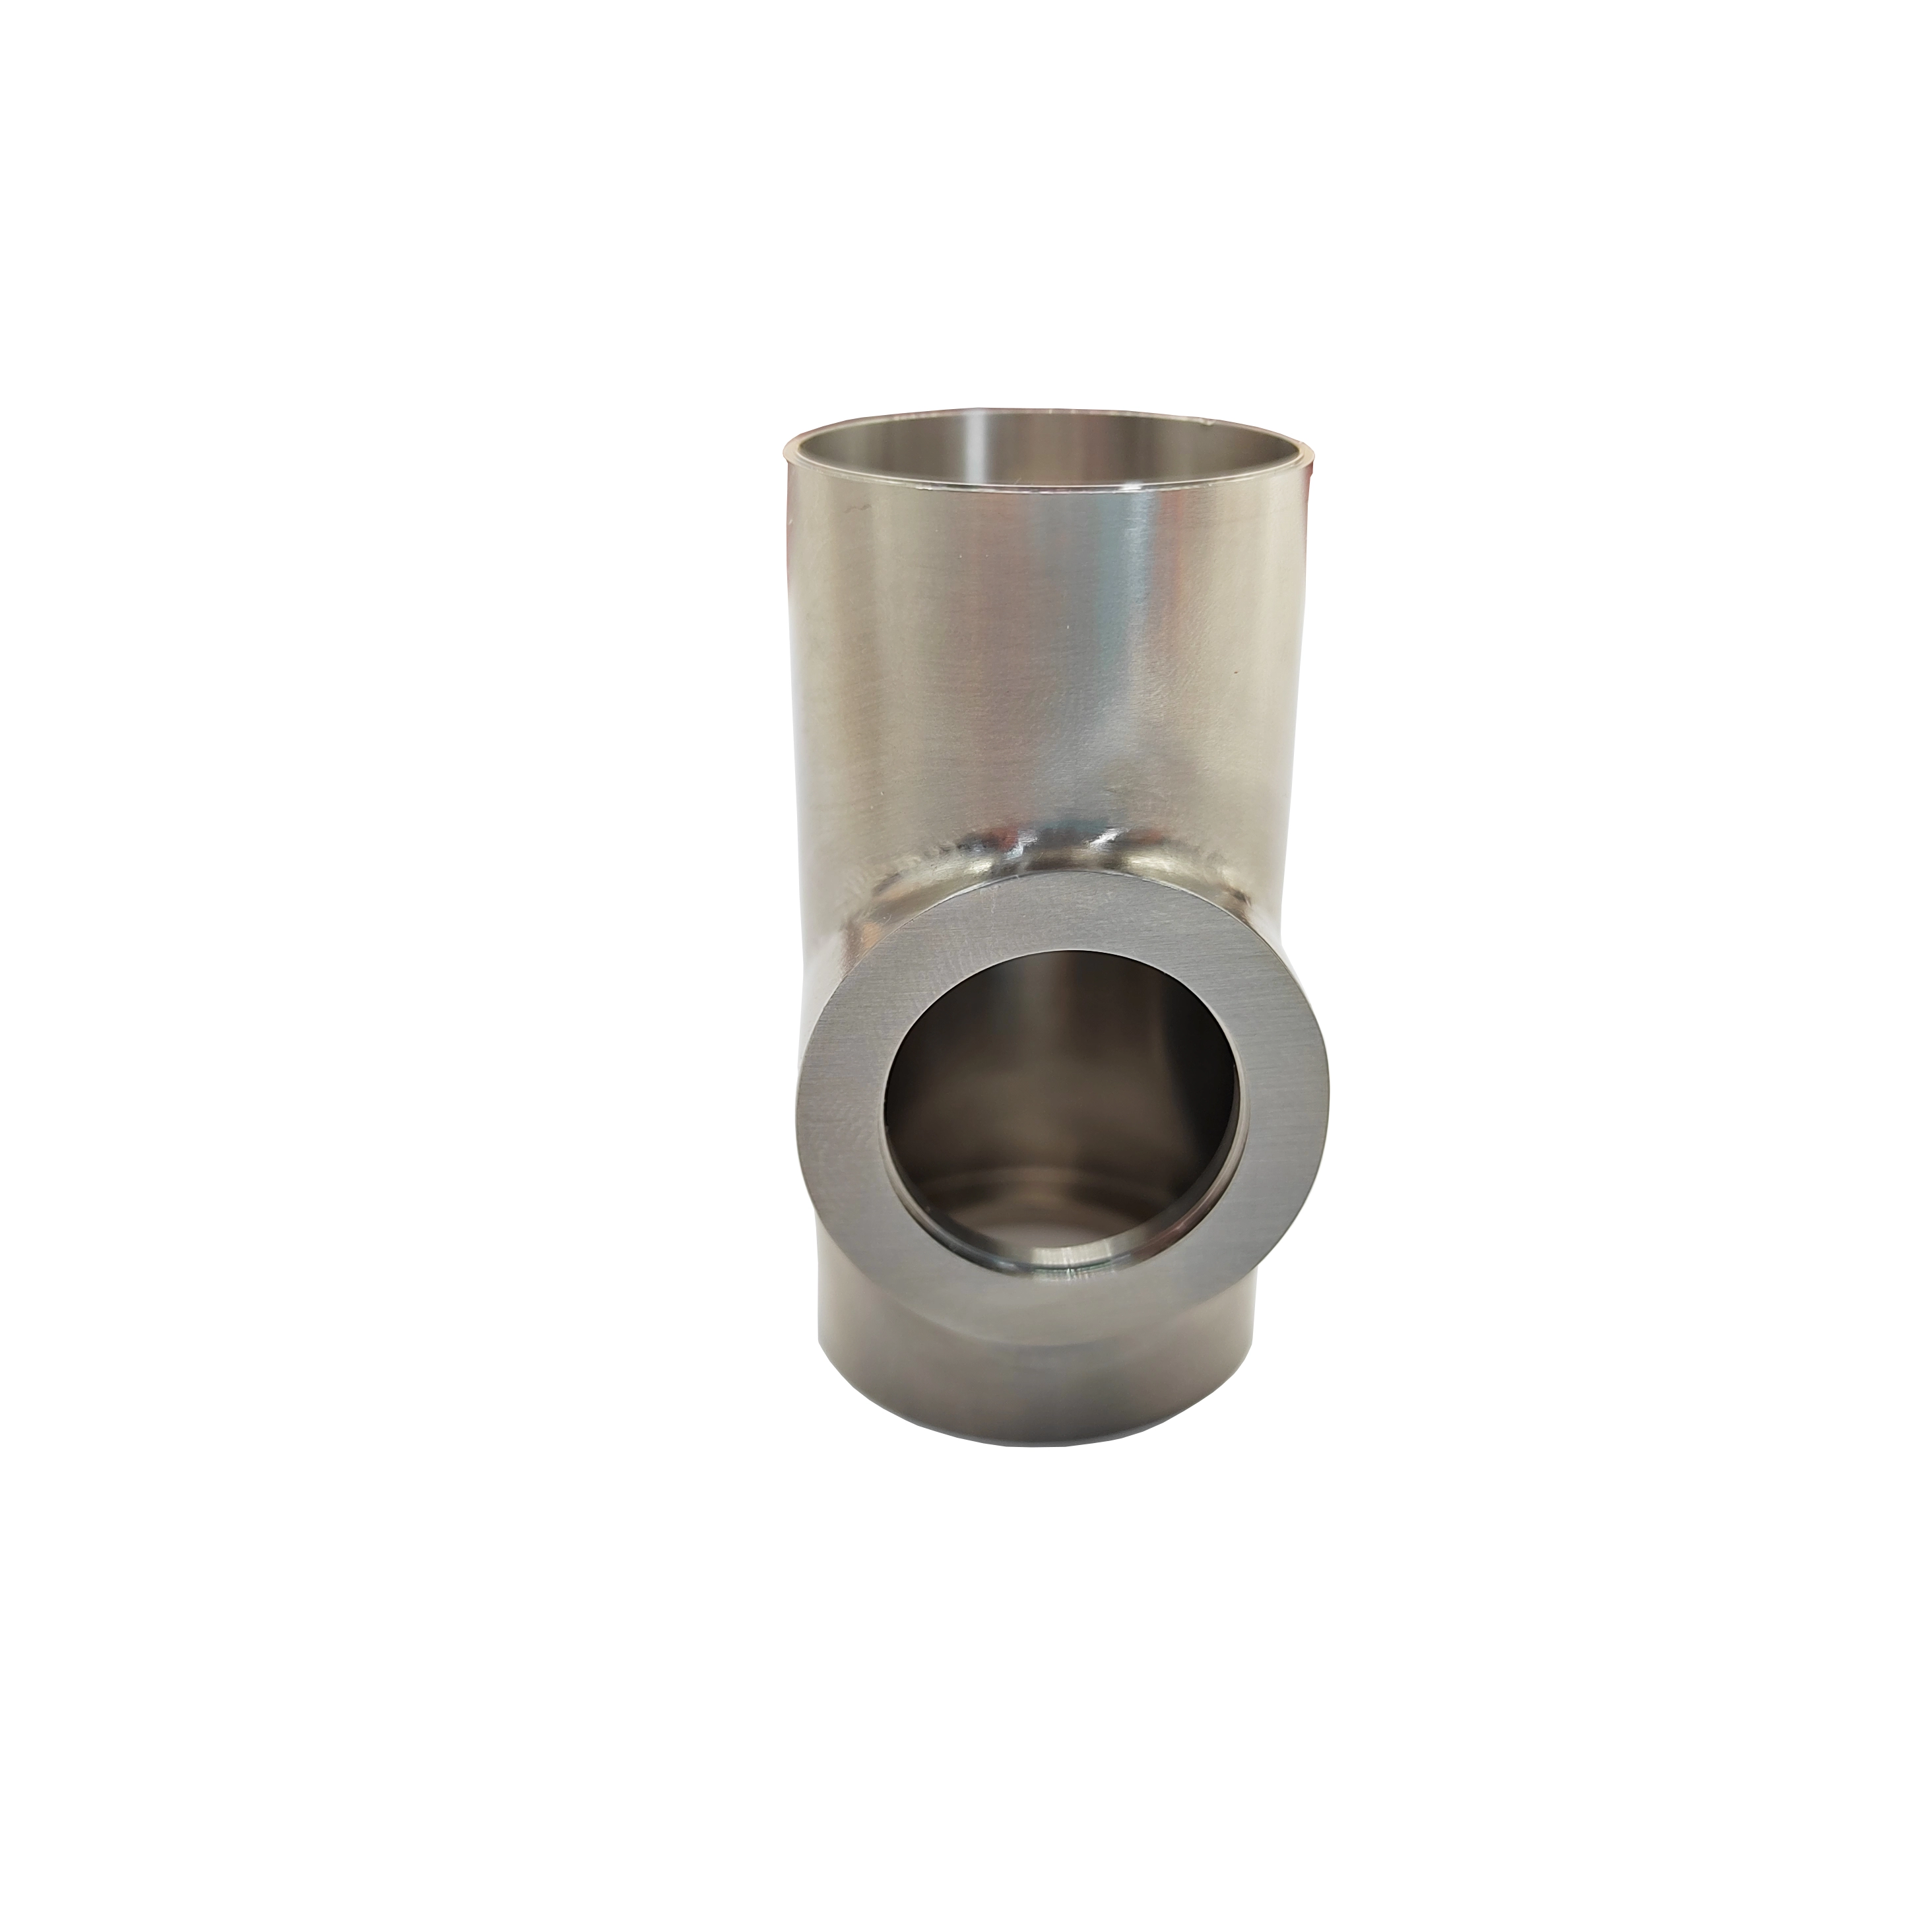 Connecting Shell Titanium Alloy Cnc Four-Axis Integral Processing